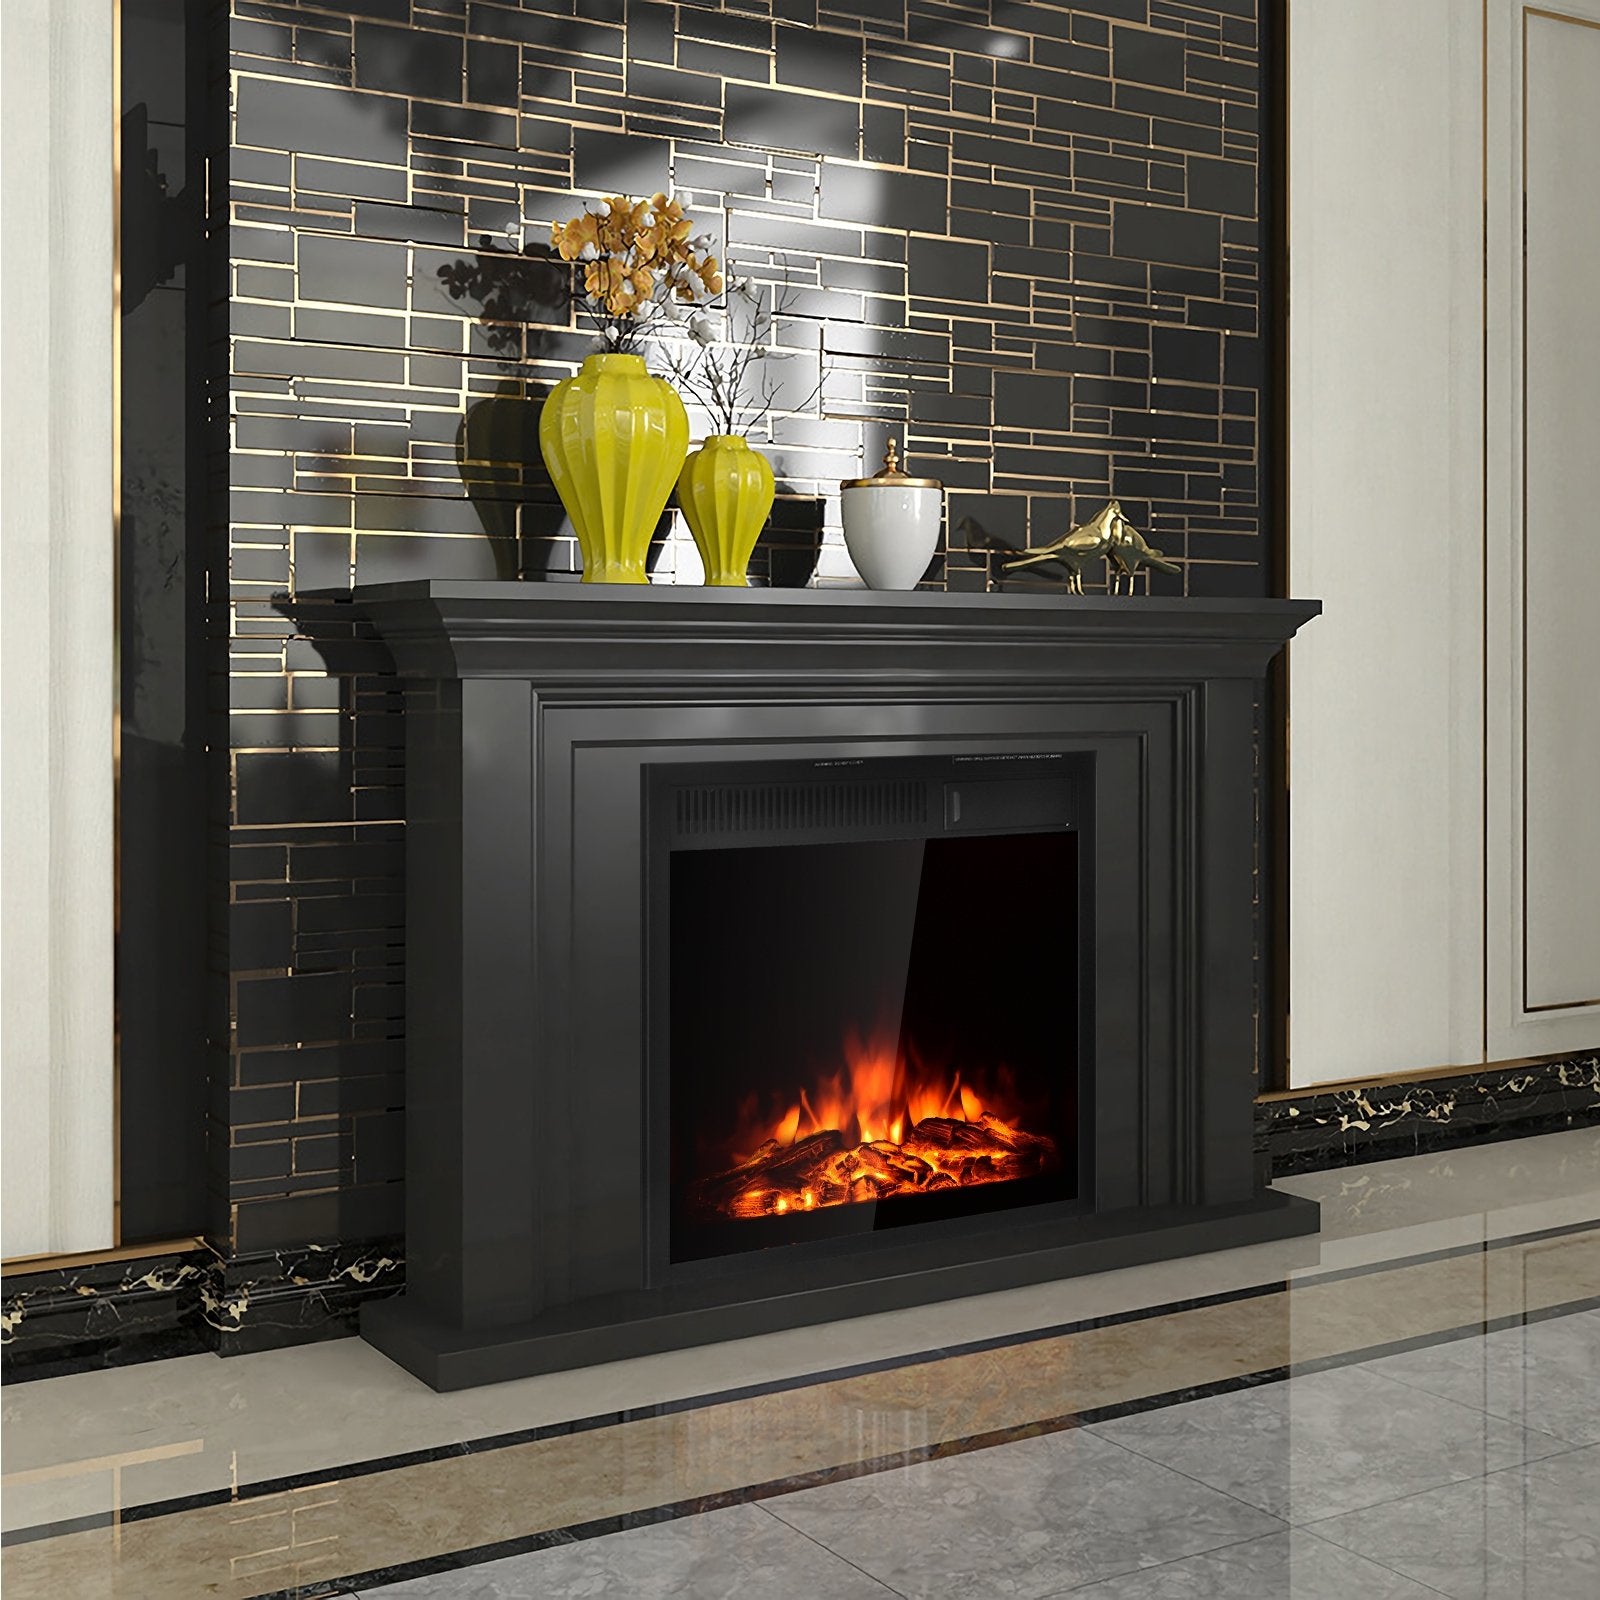 22.5" Insert Freestanding Electric Fireplace with Remote Control